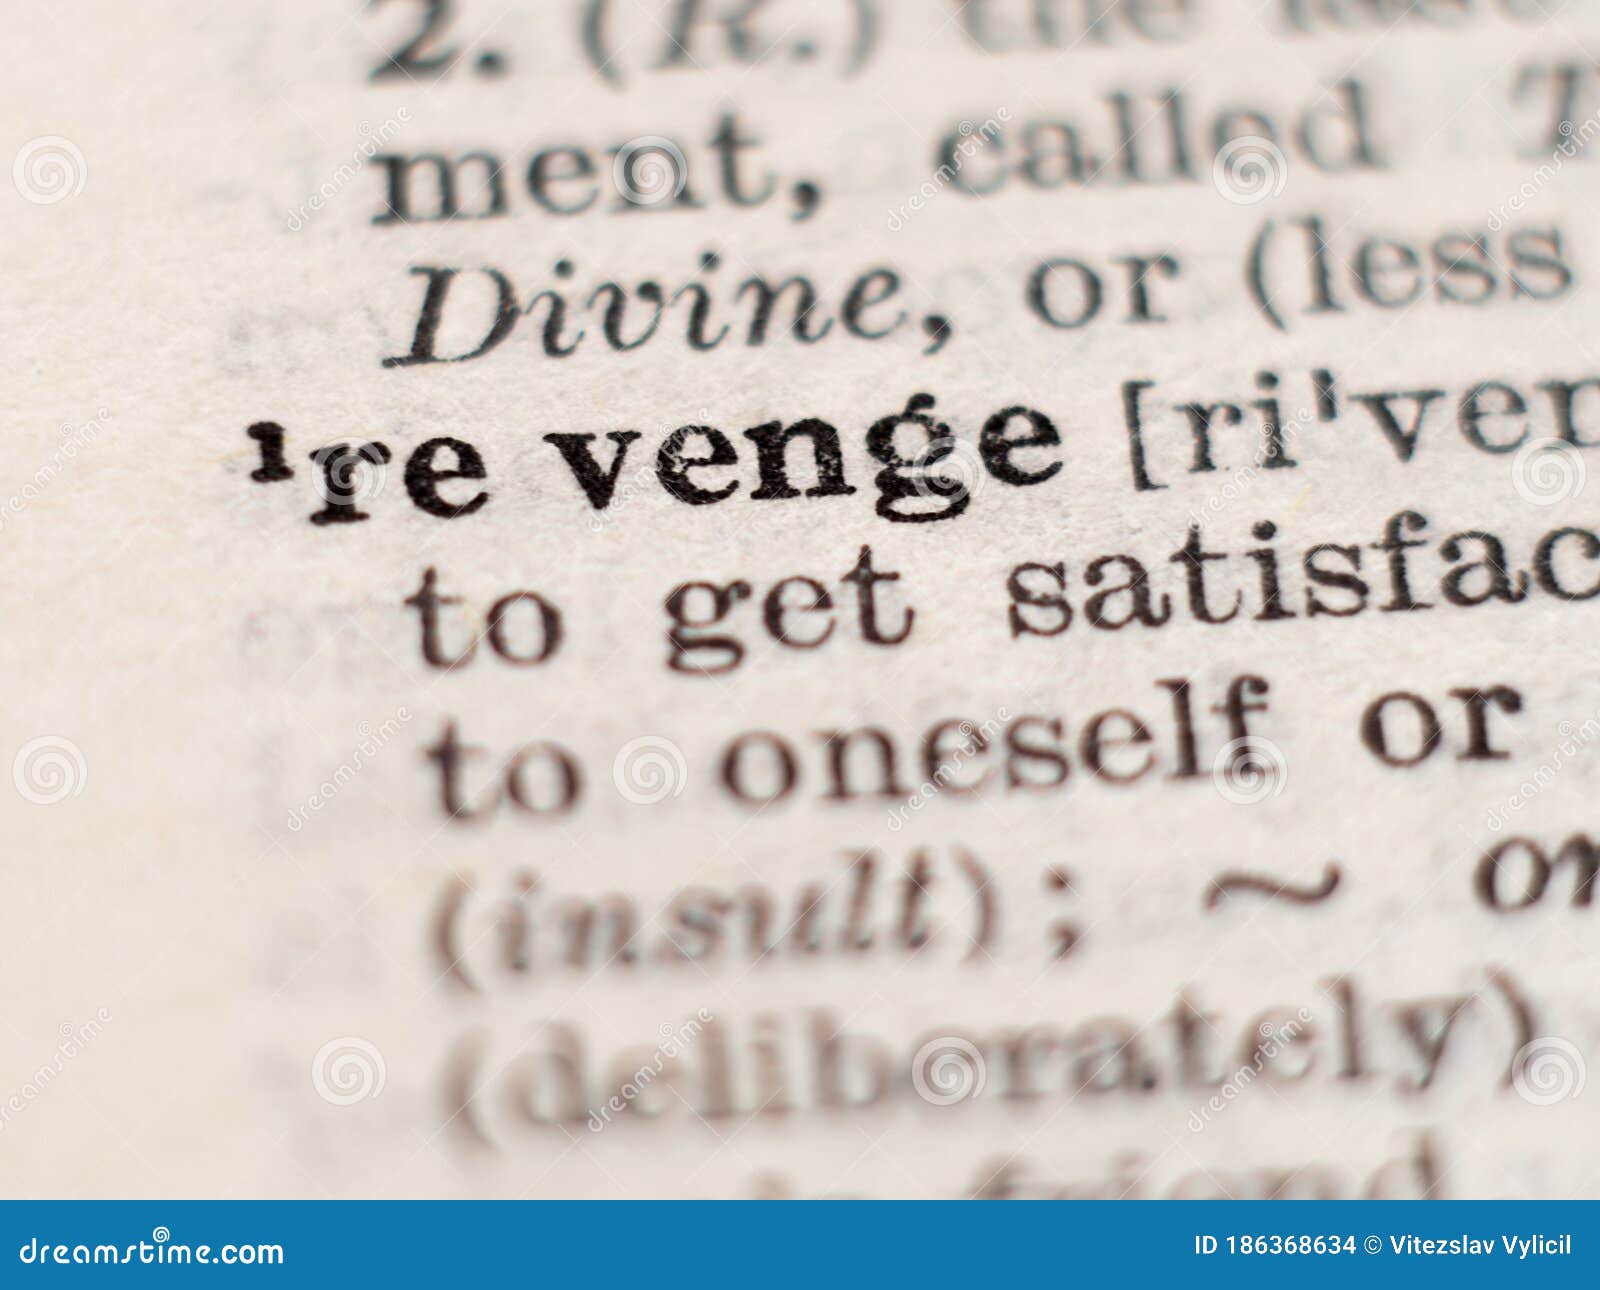 Vengeance Meaning and Alternate Words